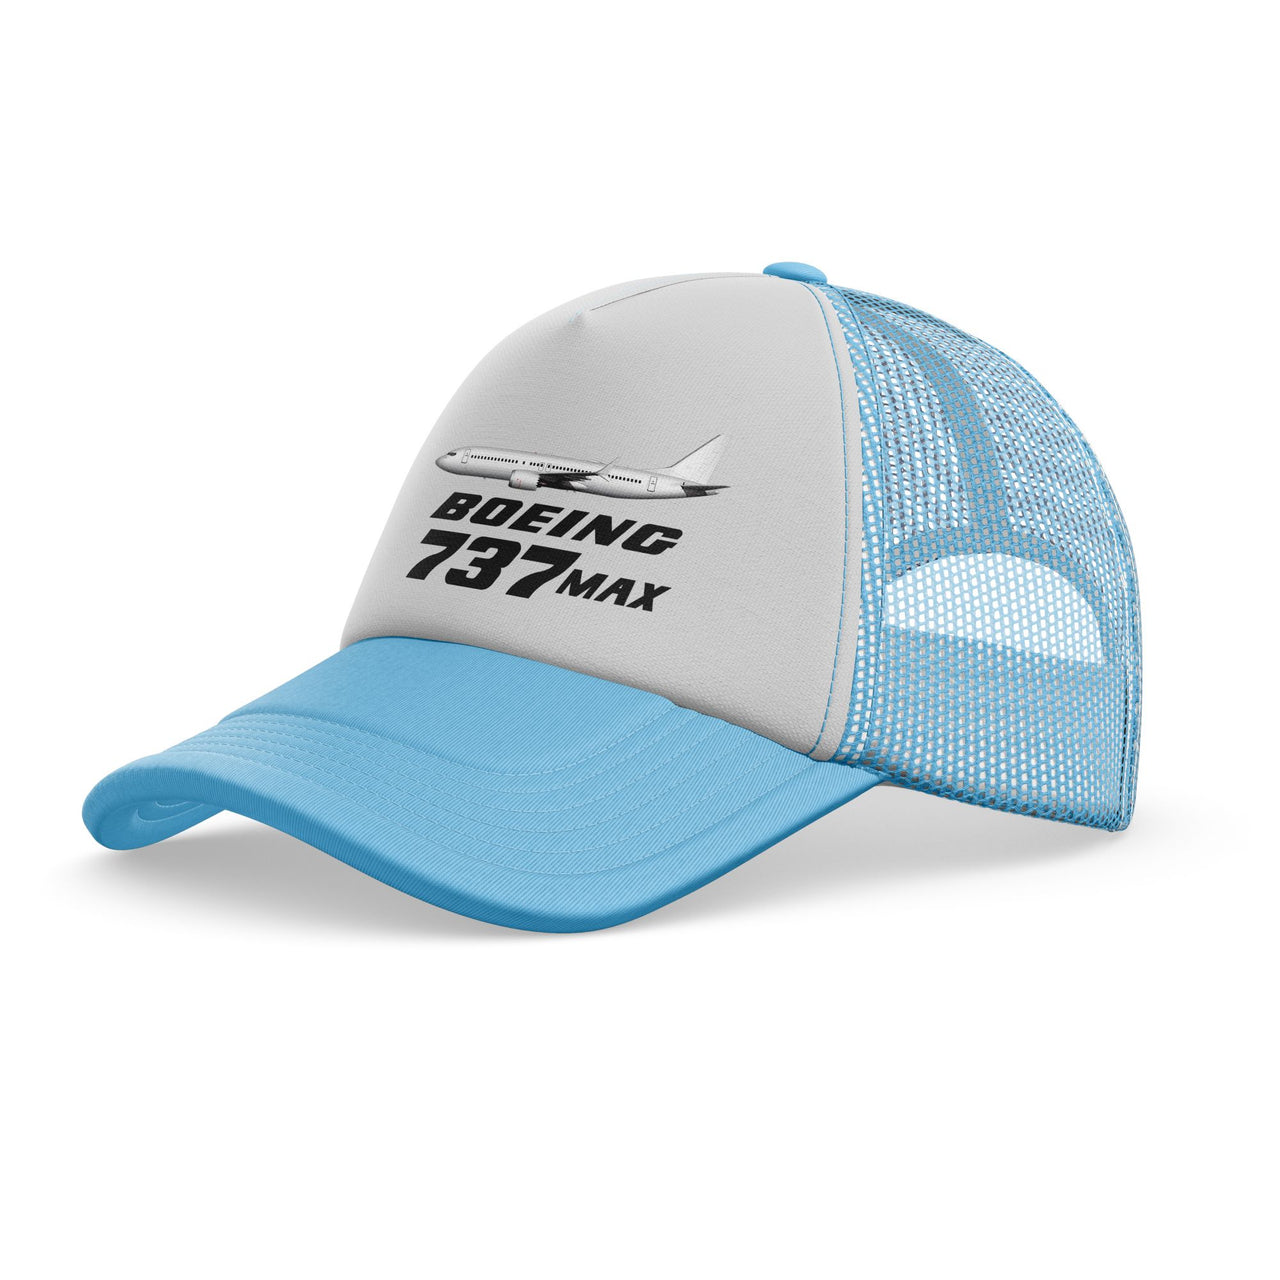 The Boeing 737Max Designed Trucker Caps & Hats